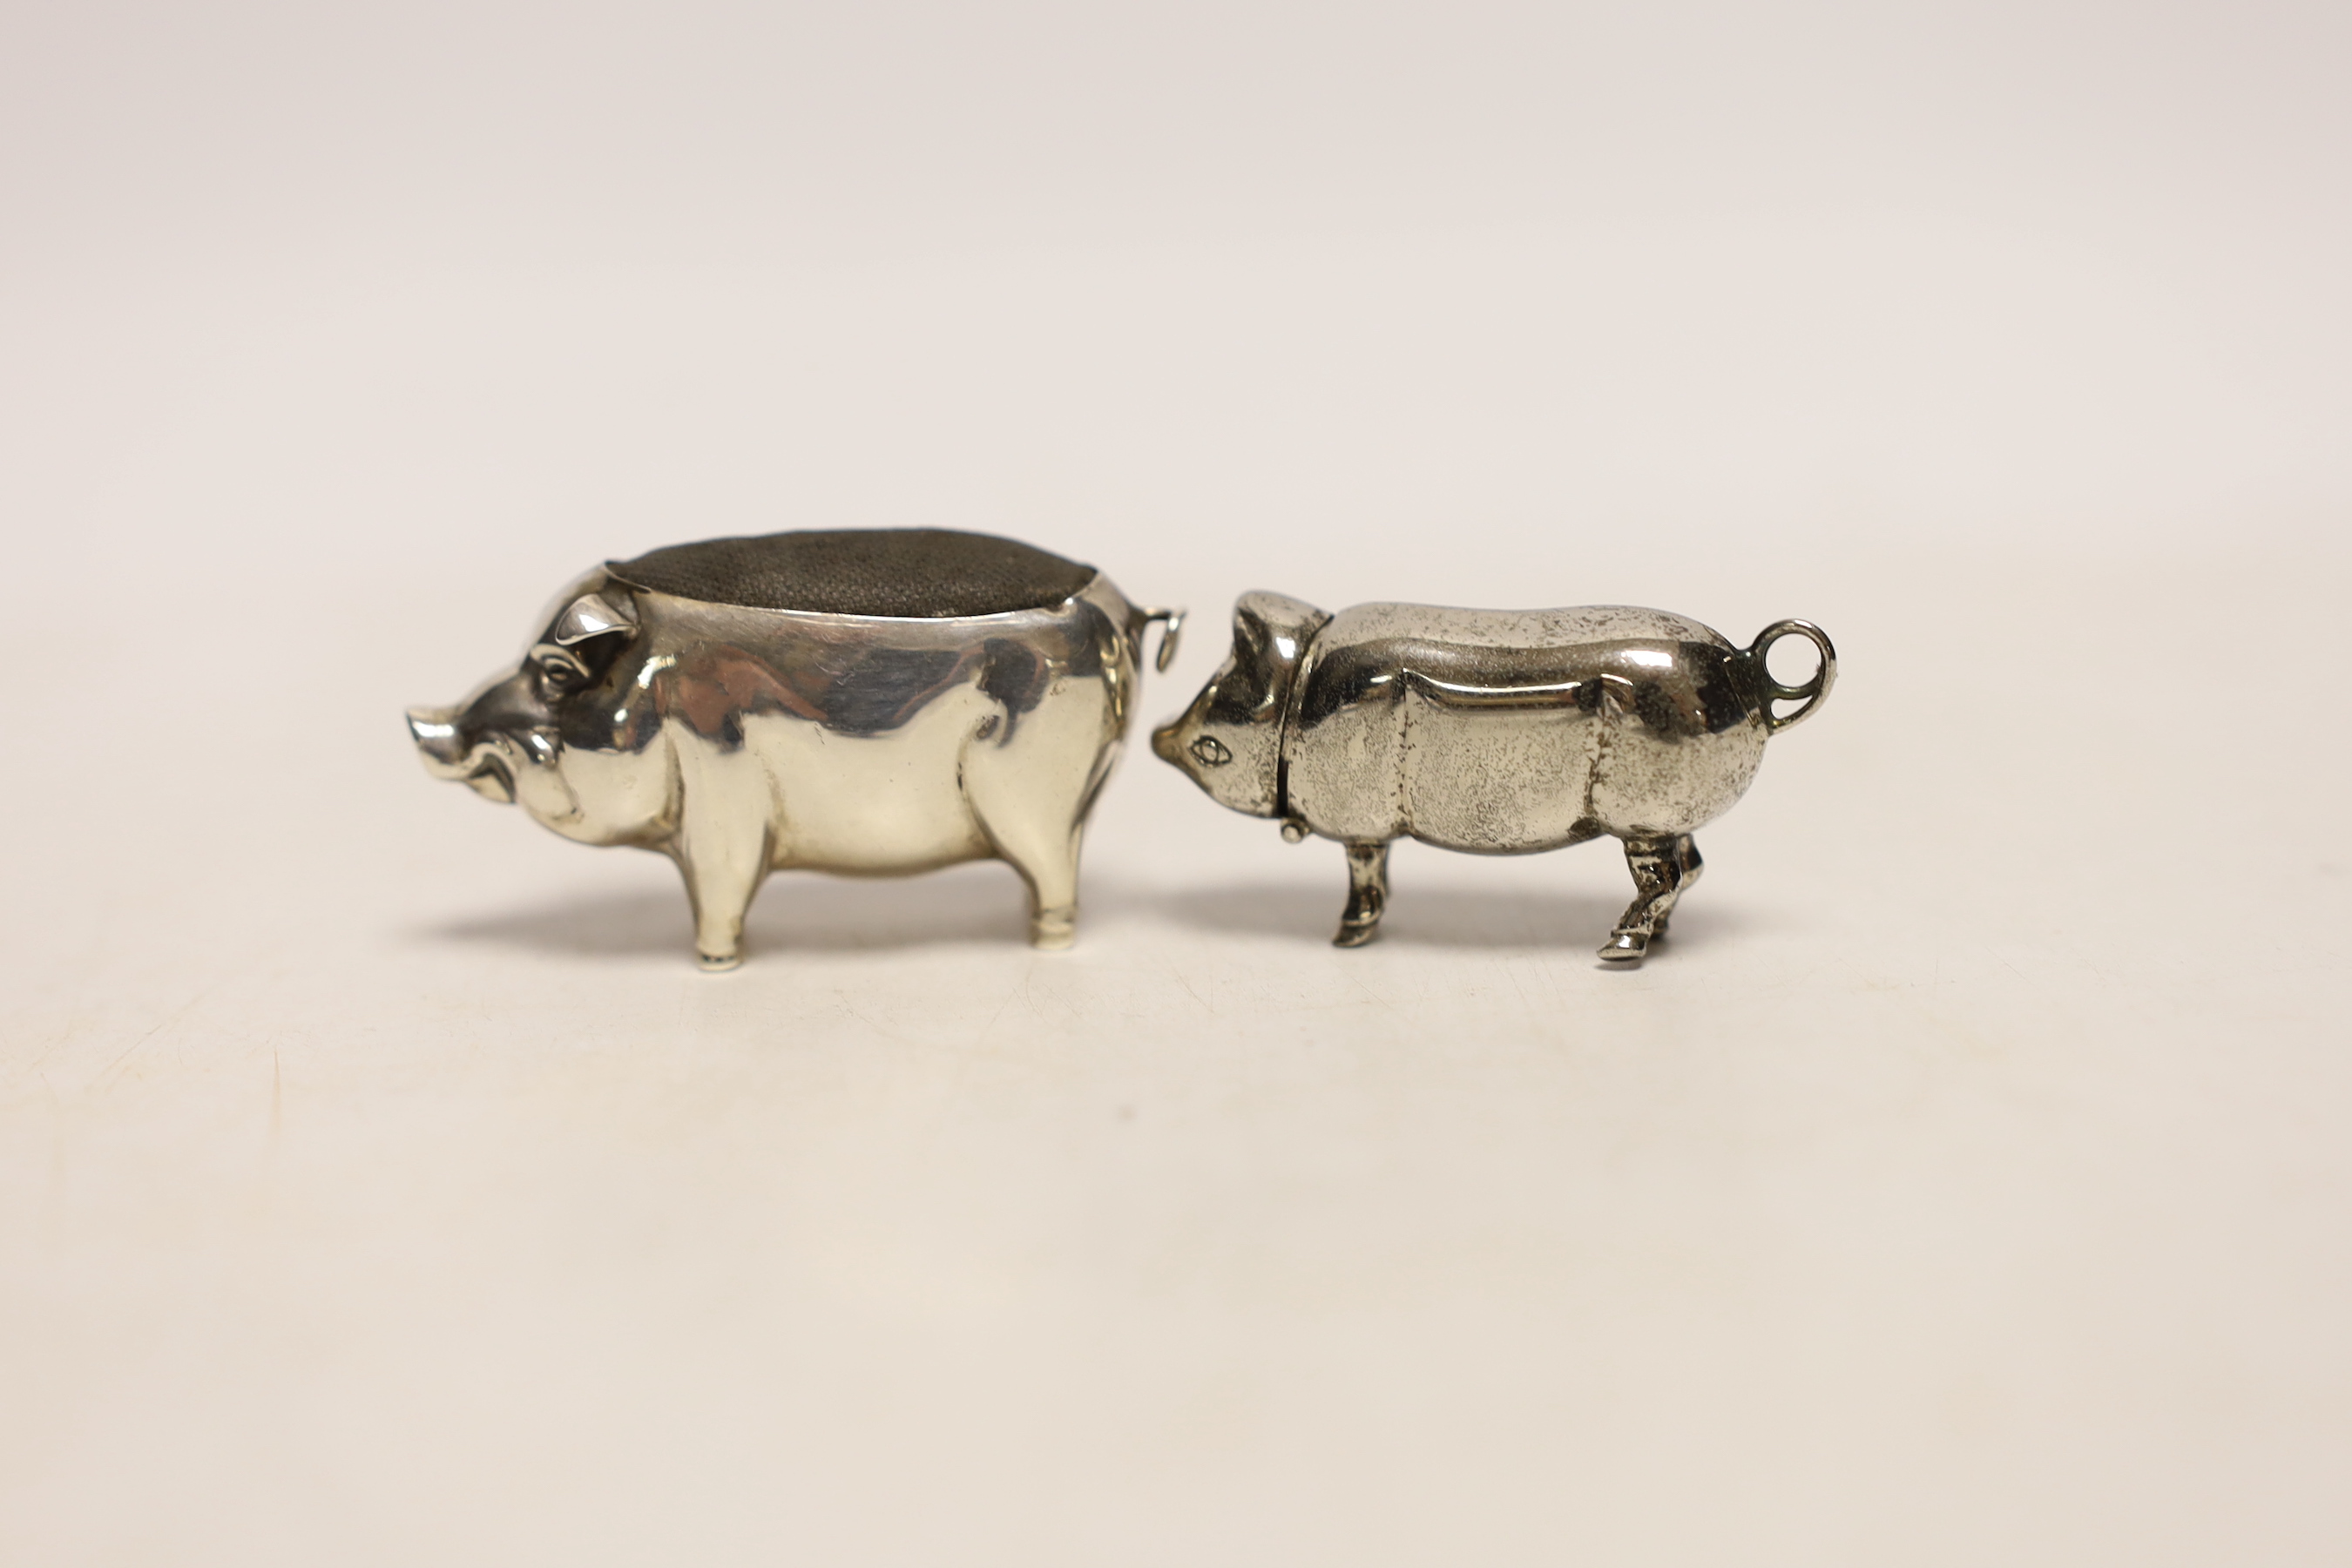 An Edwardian novelty silver pin cushion modelled as a pig, Henry Matthews, Birmingham, 1907, length 53mm, together with a metal box, modelled as a pig with hinged head.